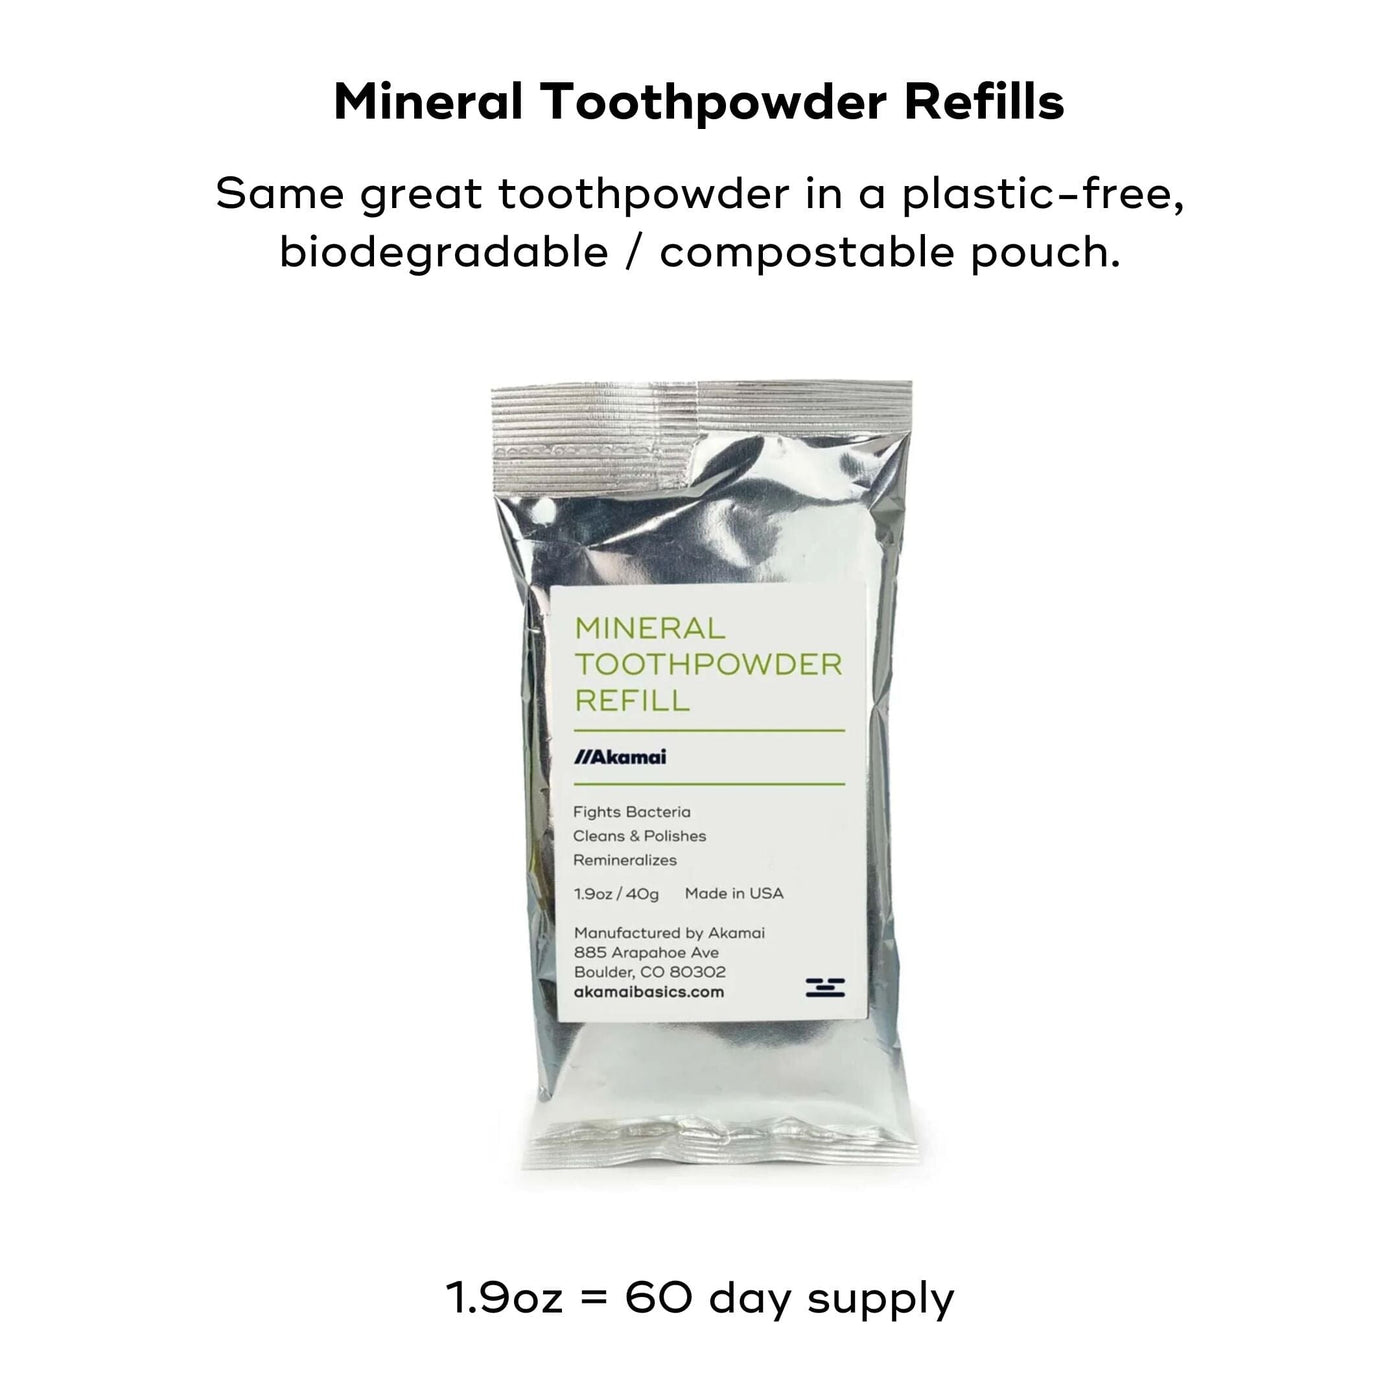 Mineral Toothpowder Refills include the same great toothpowder in a plastic-free biodegradable compostable pouch.